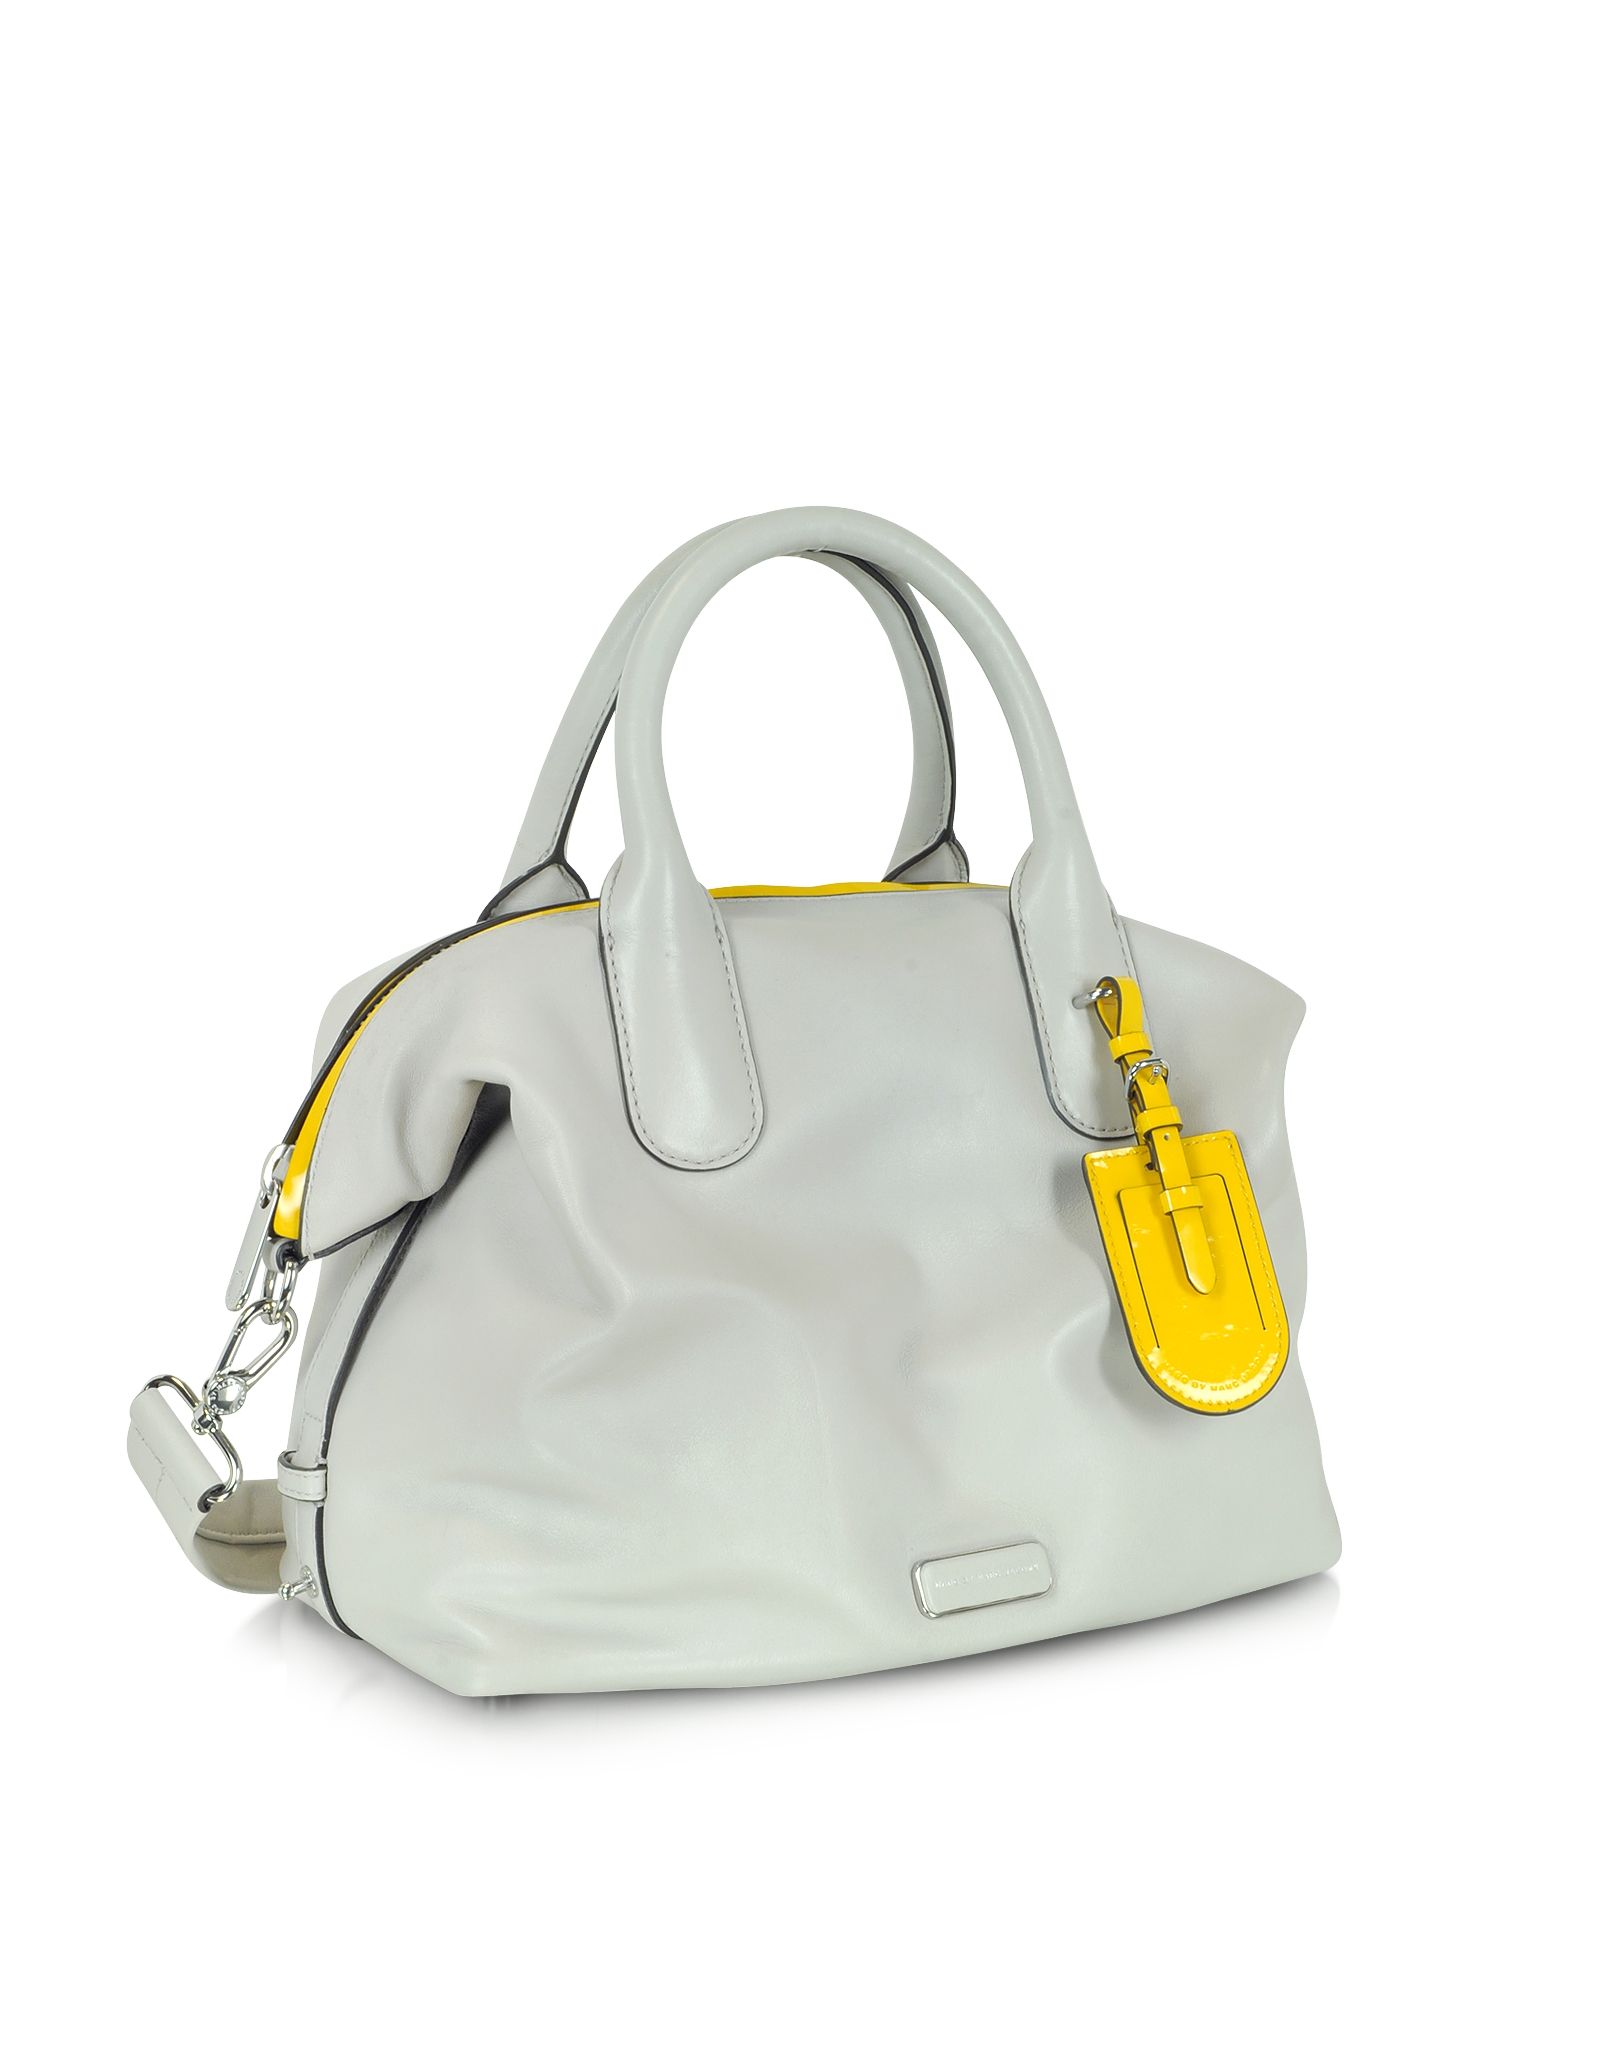 Lyst - Marc By Marc Jacobs Legend Large Bone Leather Handbag in White